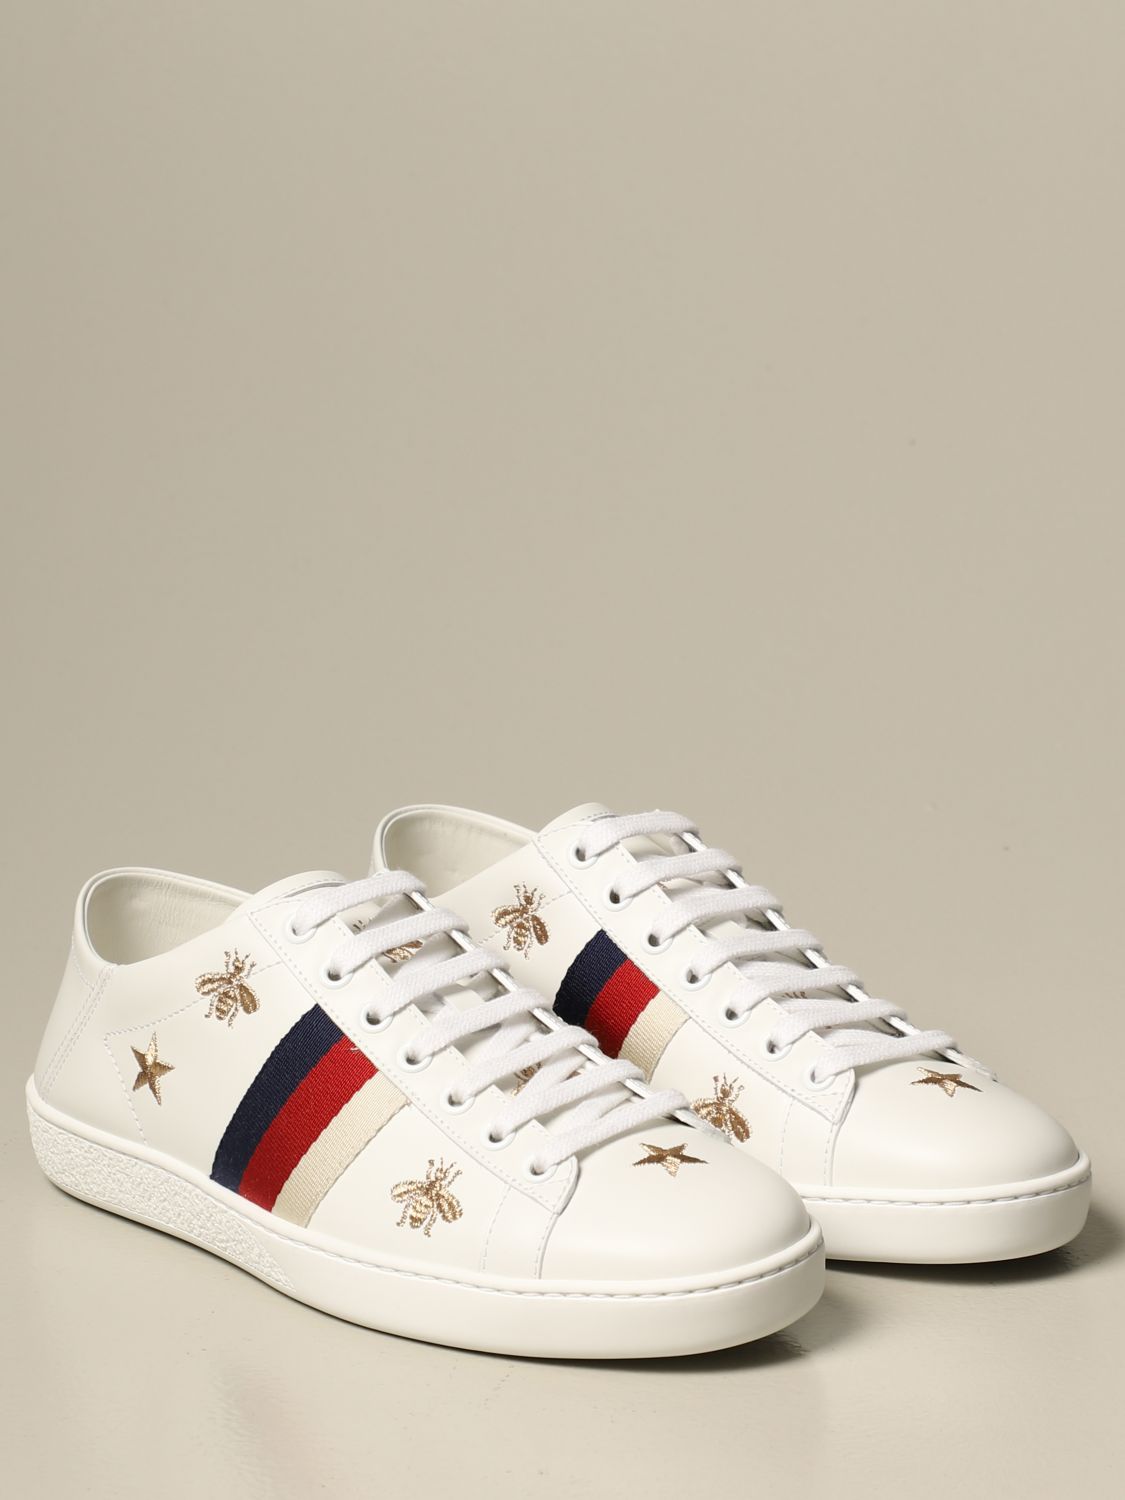 GUCCI: Ace sneakers in leather with bees and stars | Sneakers Gucci ...